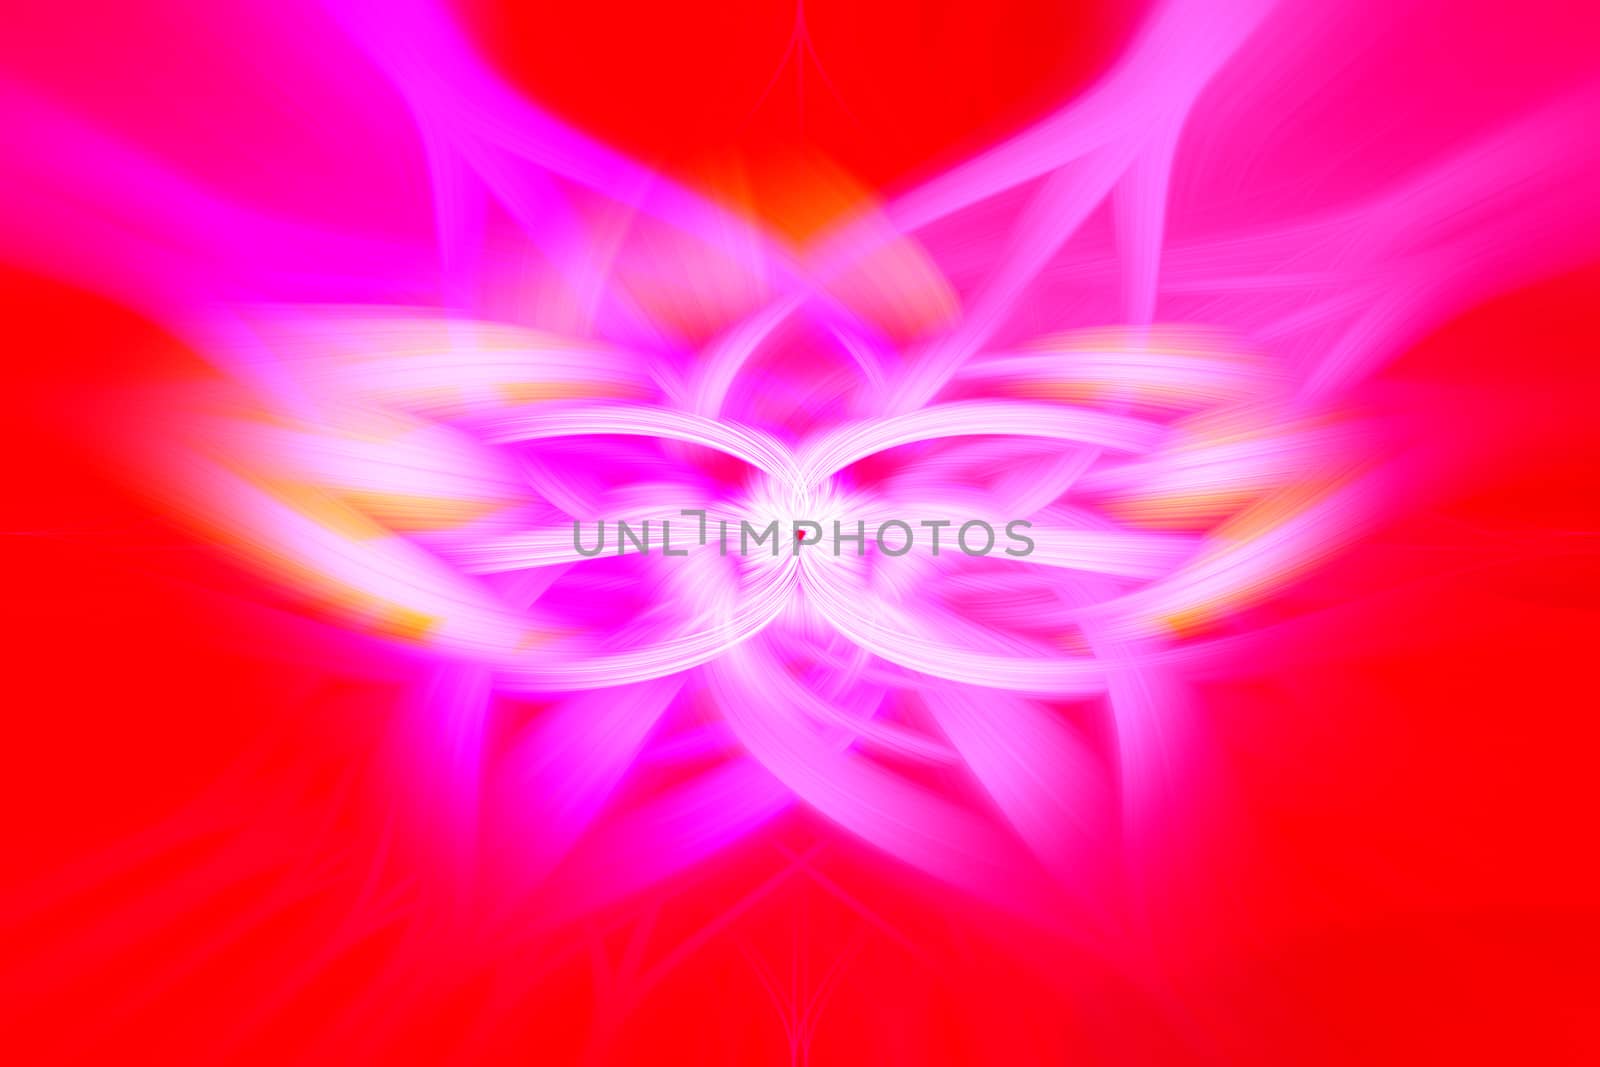 Beautiful abstract intertwined 3d fibers forming an ornament out of various symmetrical shapes. Purple, pink, yellow, and red colors. Illustration.